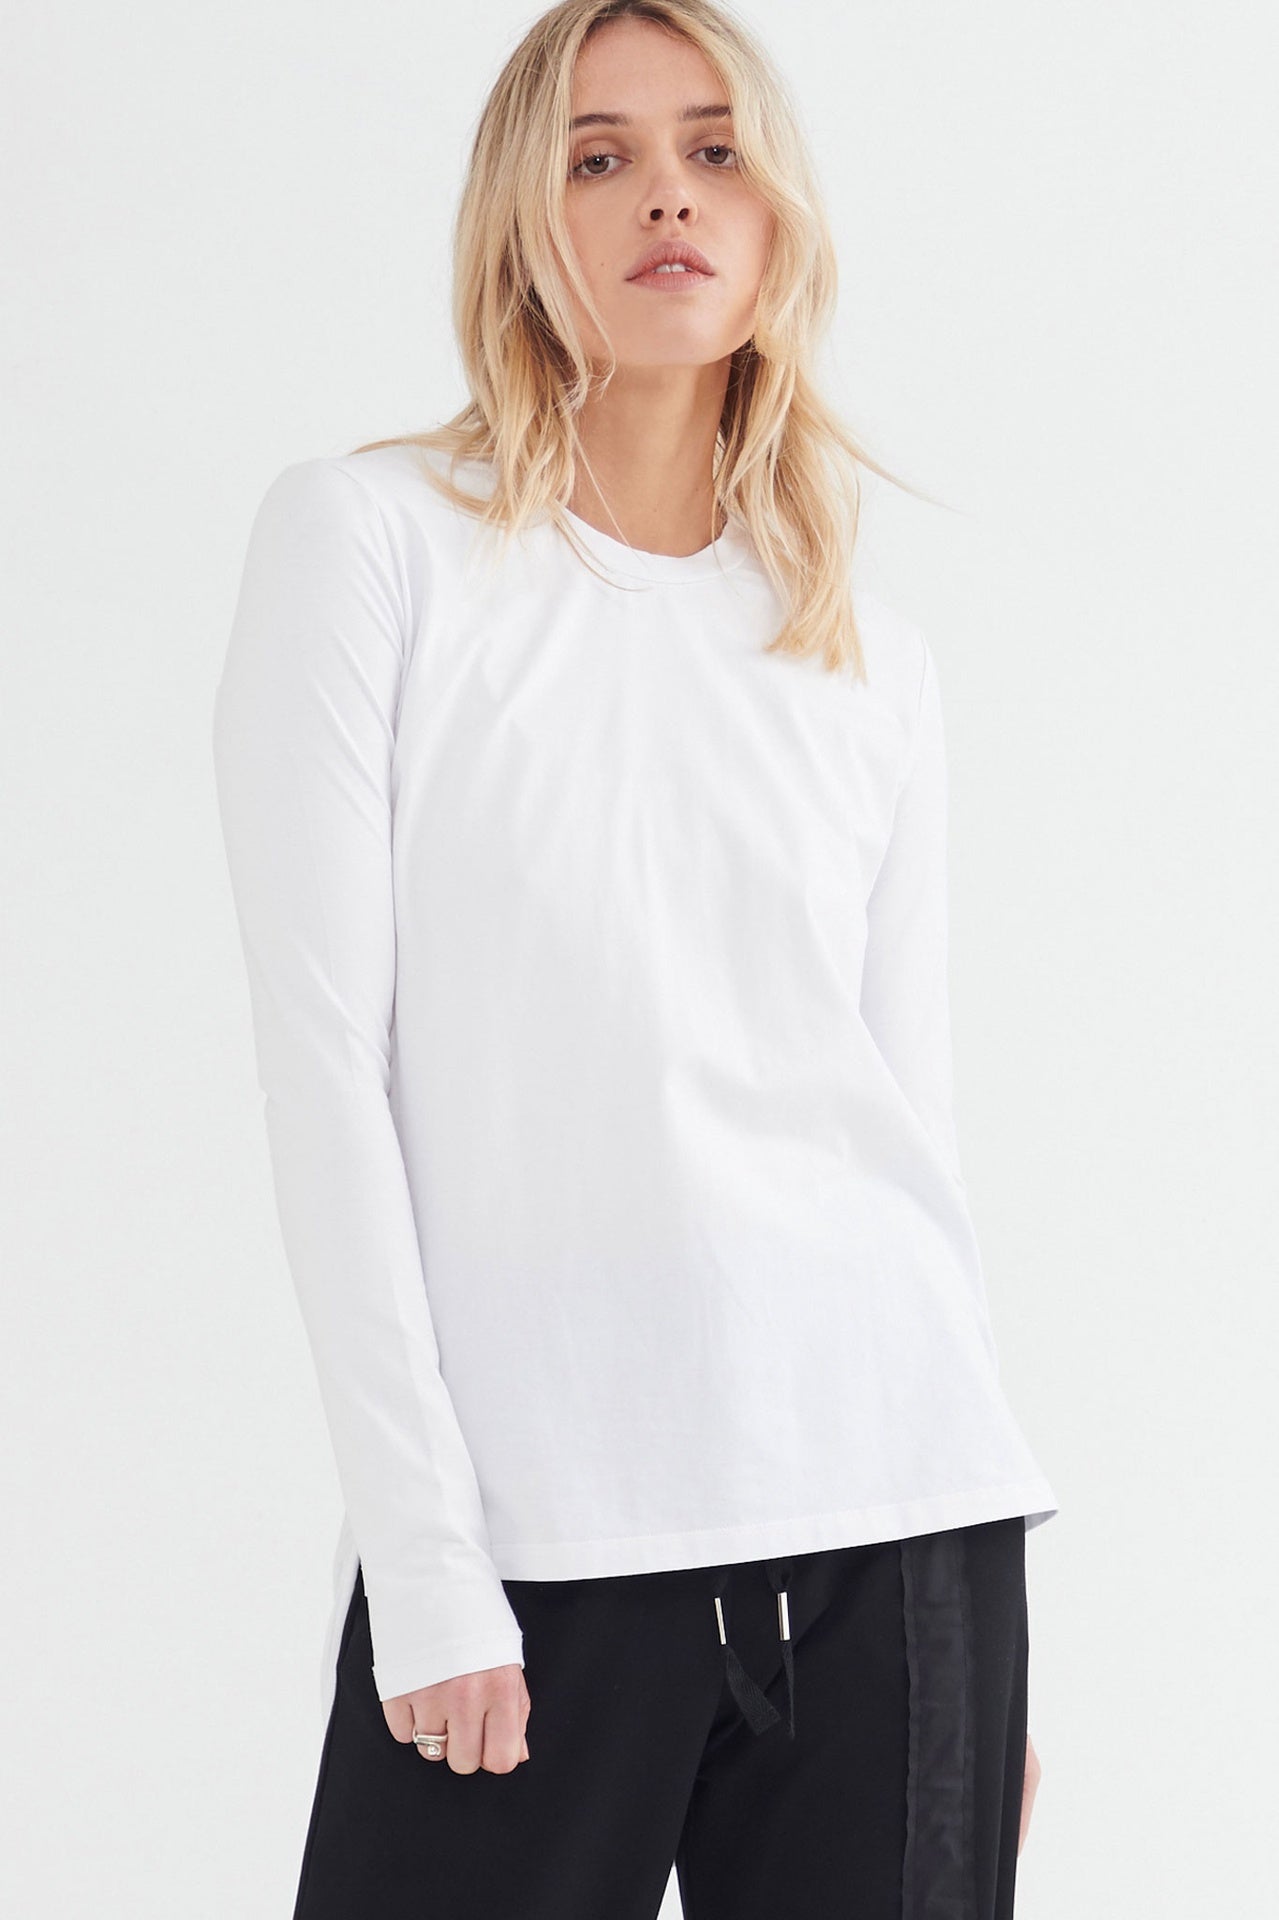 Strip Channel Tee - Ivory in Ivory - Taylor